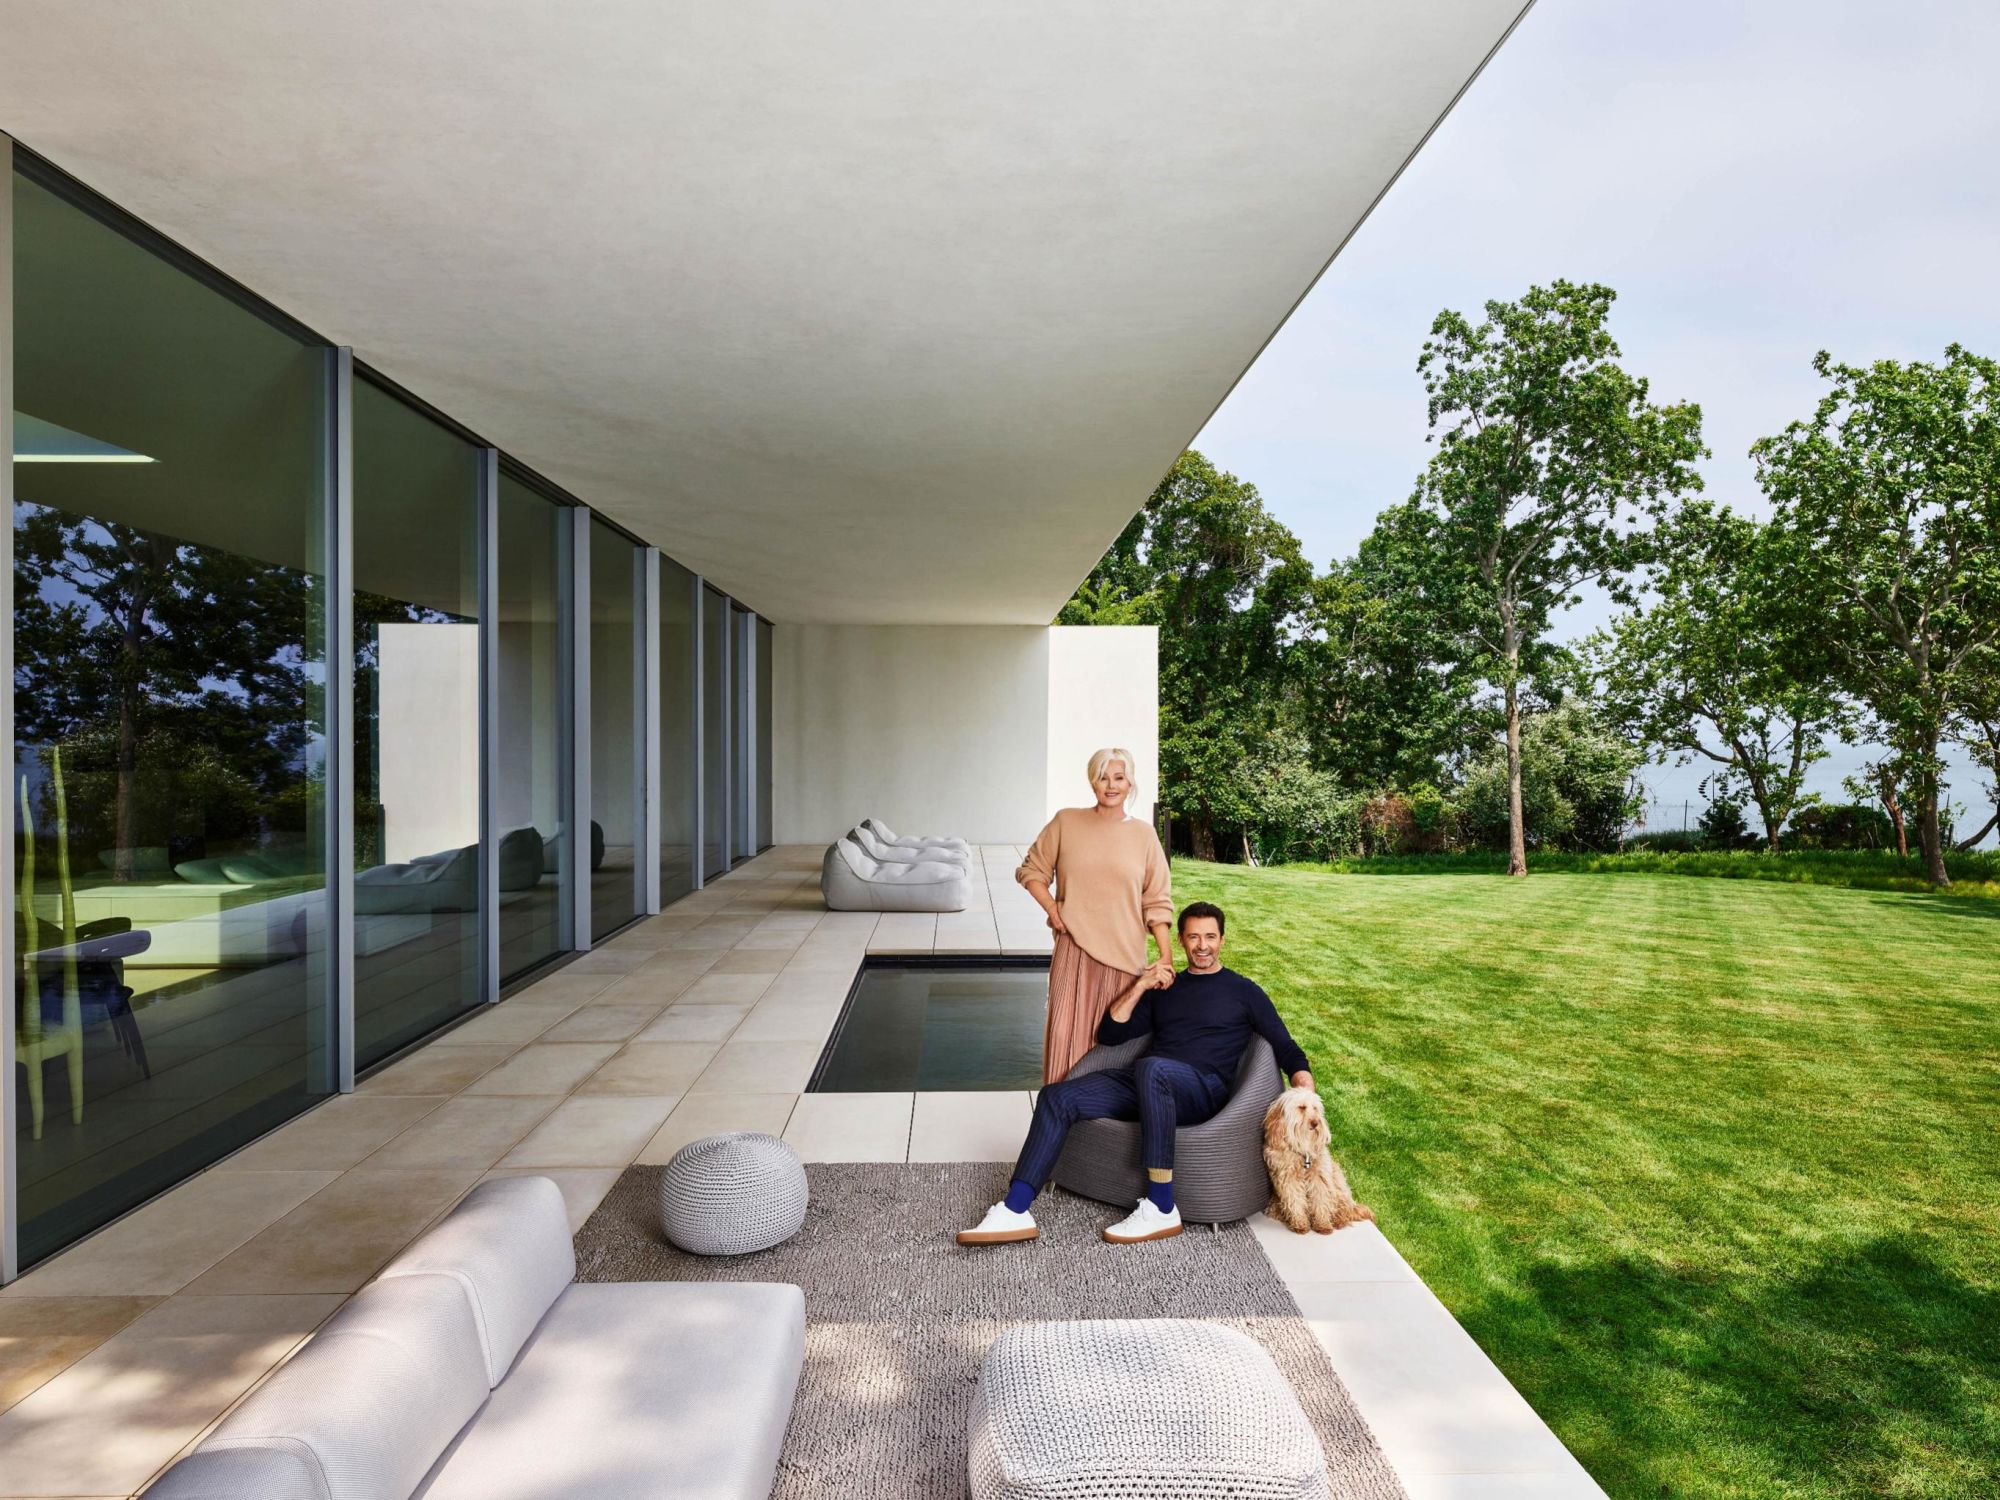 9 Minimalist Homes That Are Stylish and Tranquil, Architectural Digest